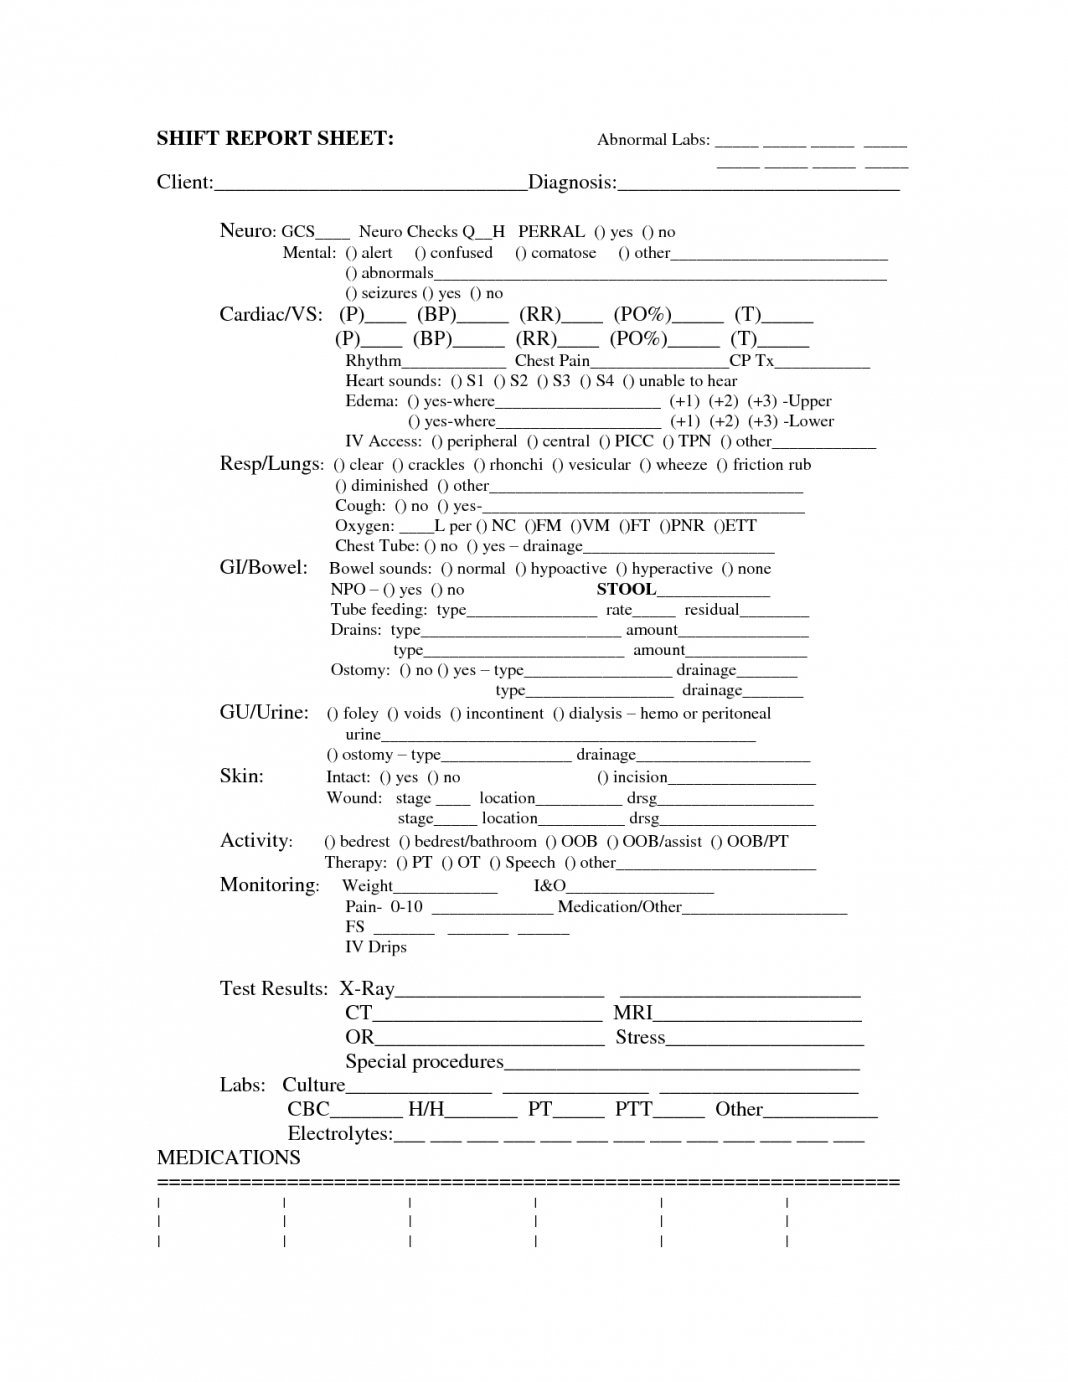 Shift Report Template Examples Restaurant Nursing Daily End Within Nurse Report Template